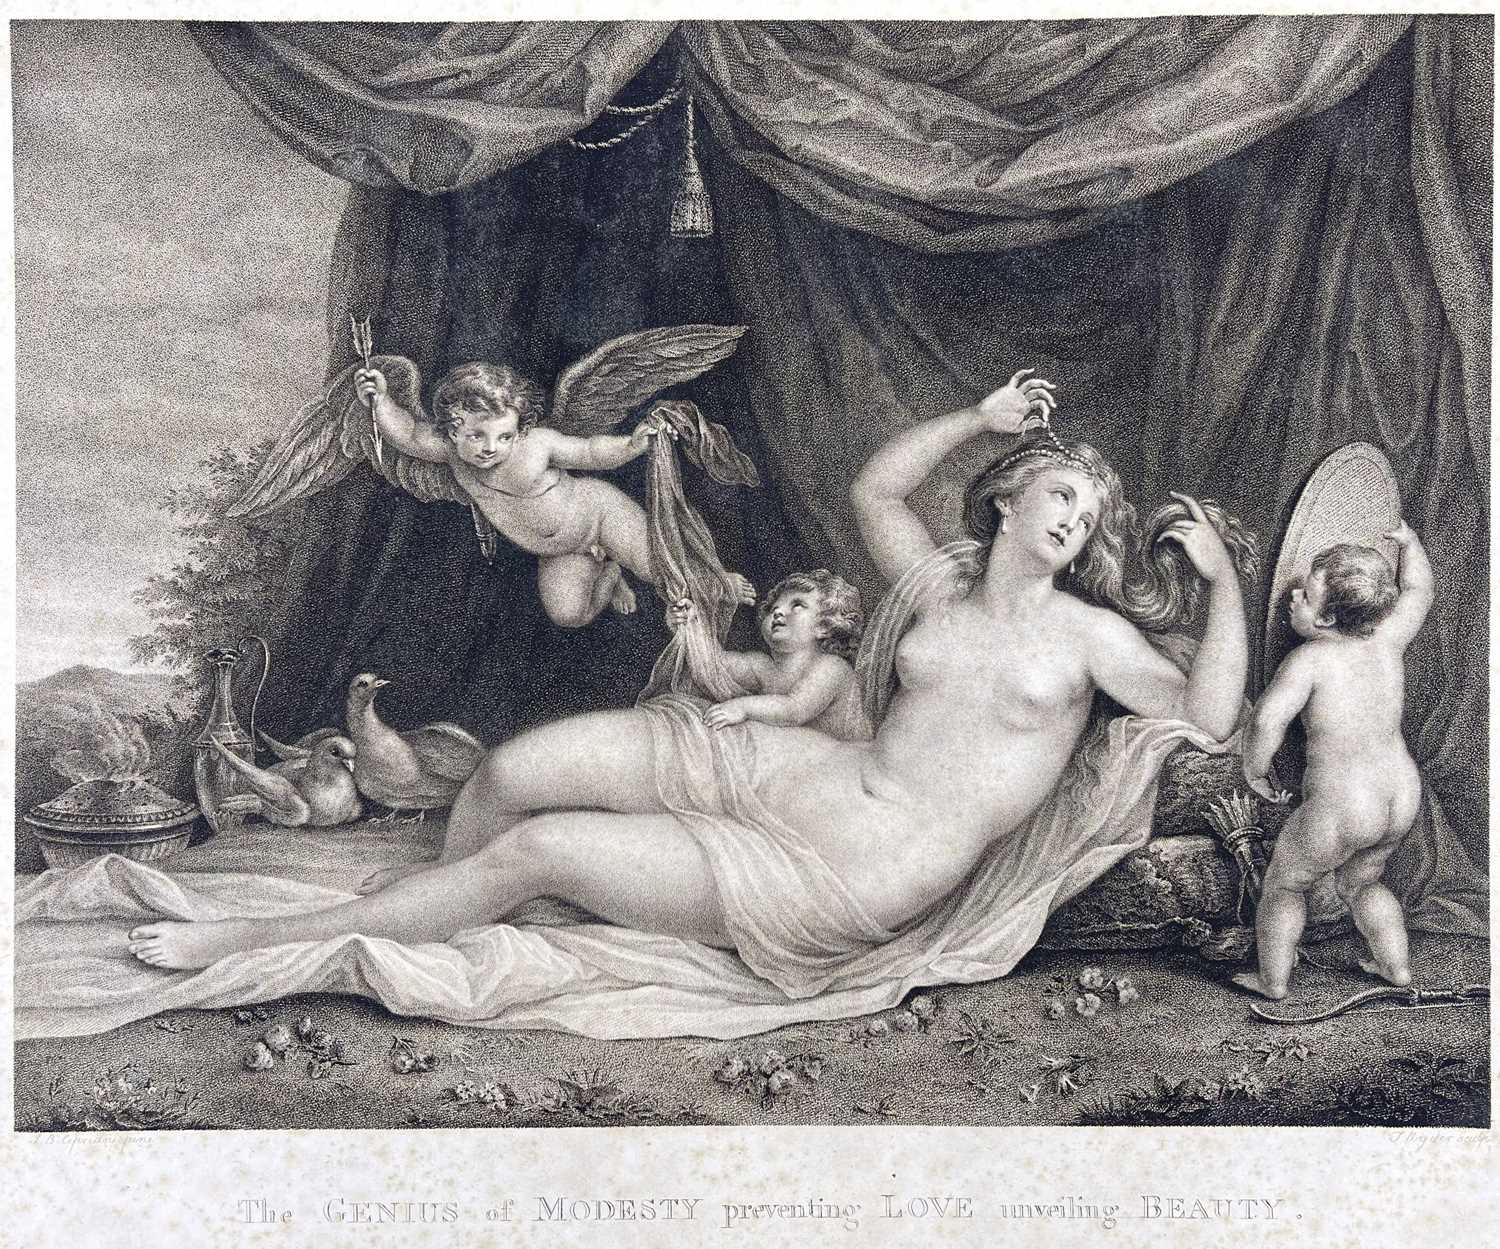 THOMAS RYDER I (1746-1810). 'The Genius of Modesty preventing Love unveiling Beauty,' by Laurence J. - Image 3 of 9